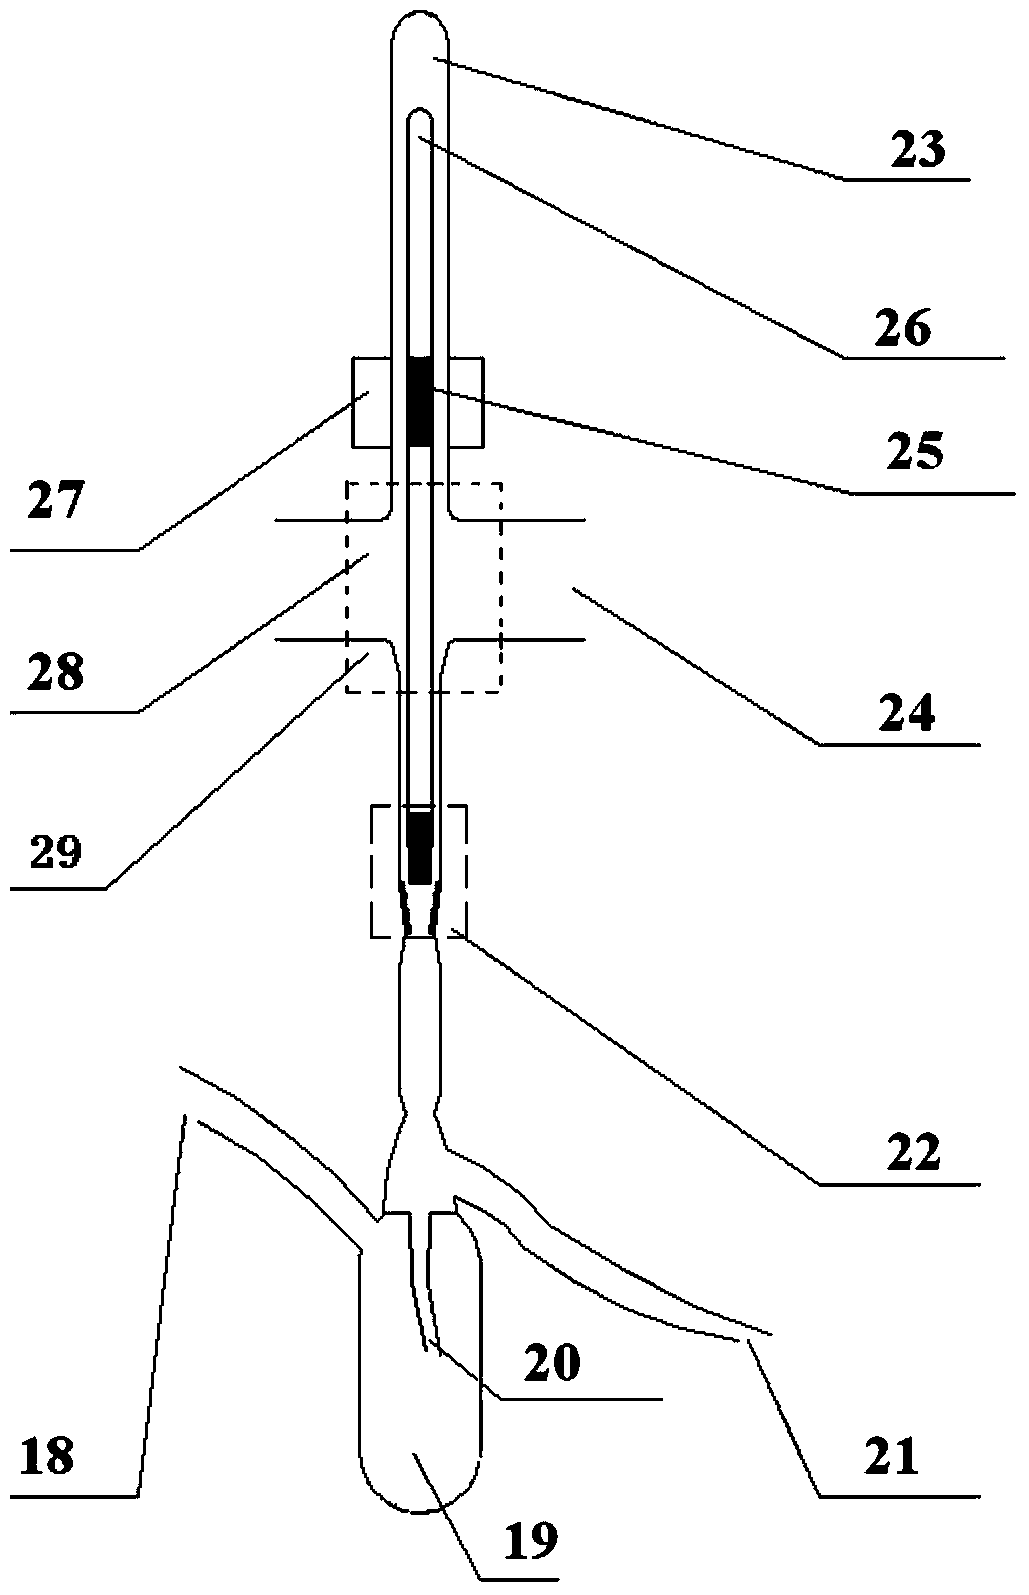 Device for purifying metal by vacuum distillation